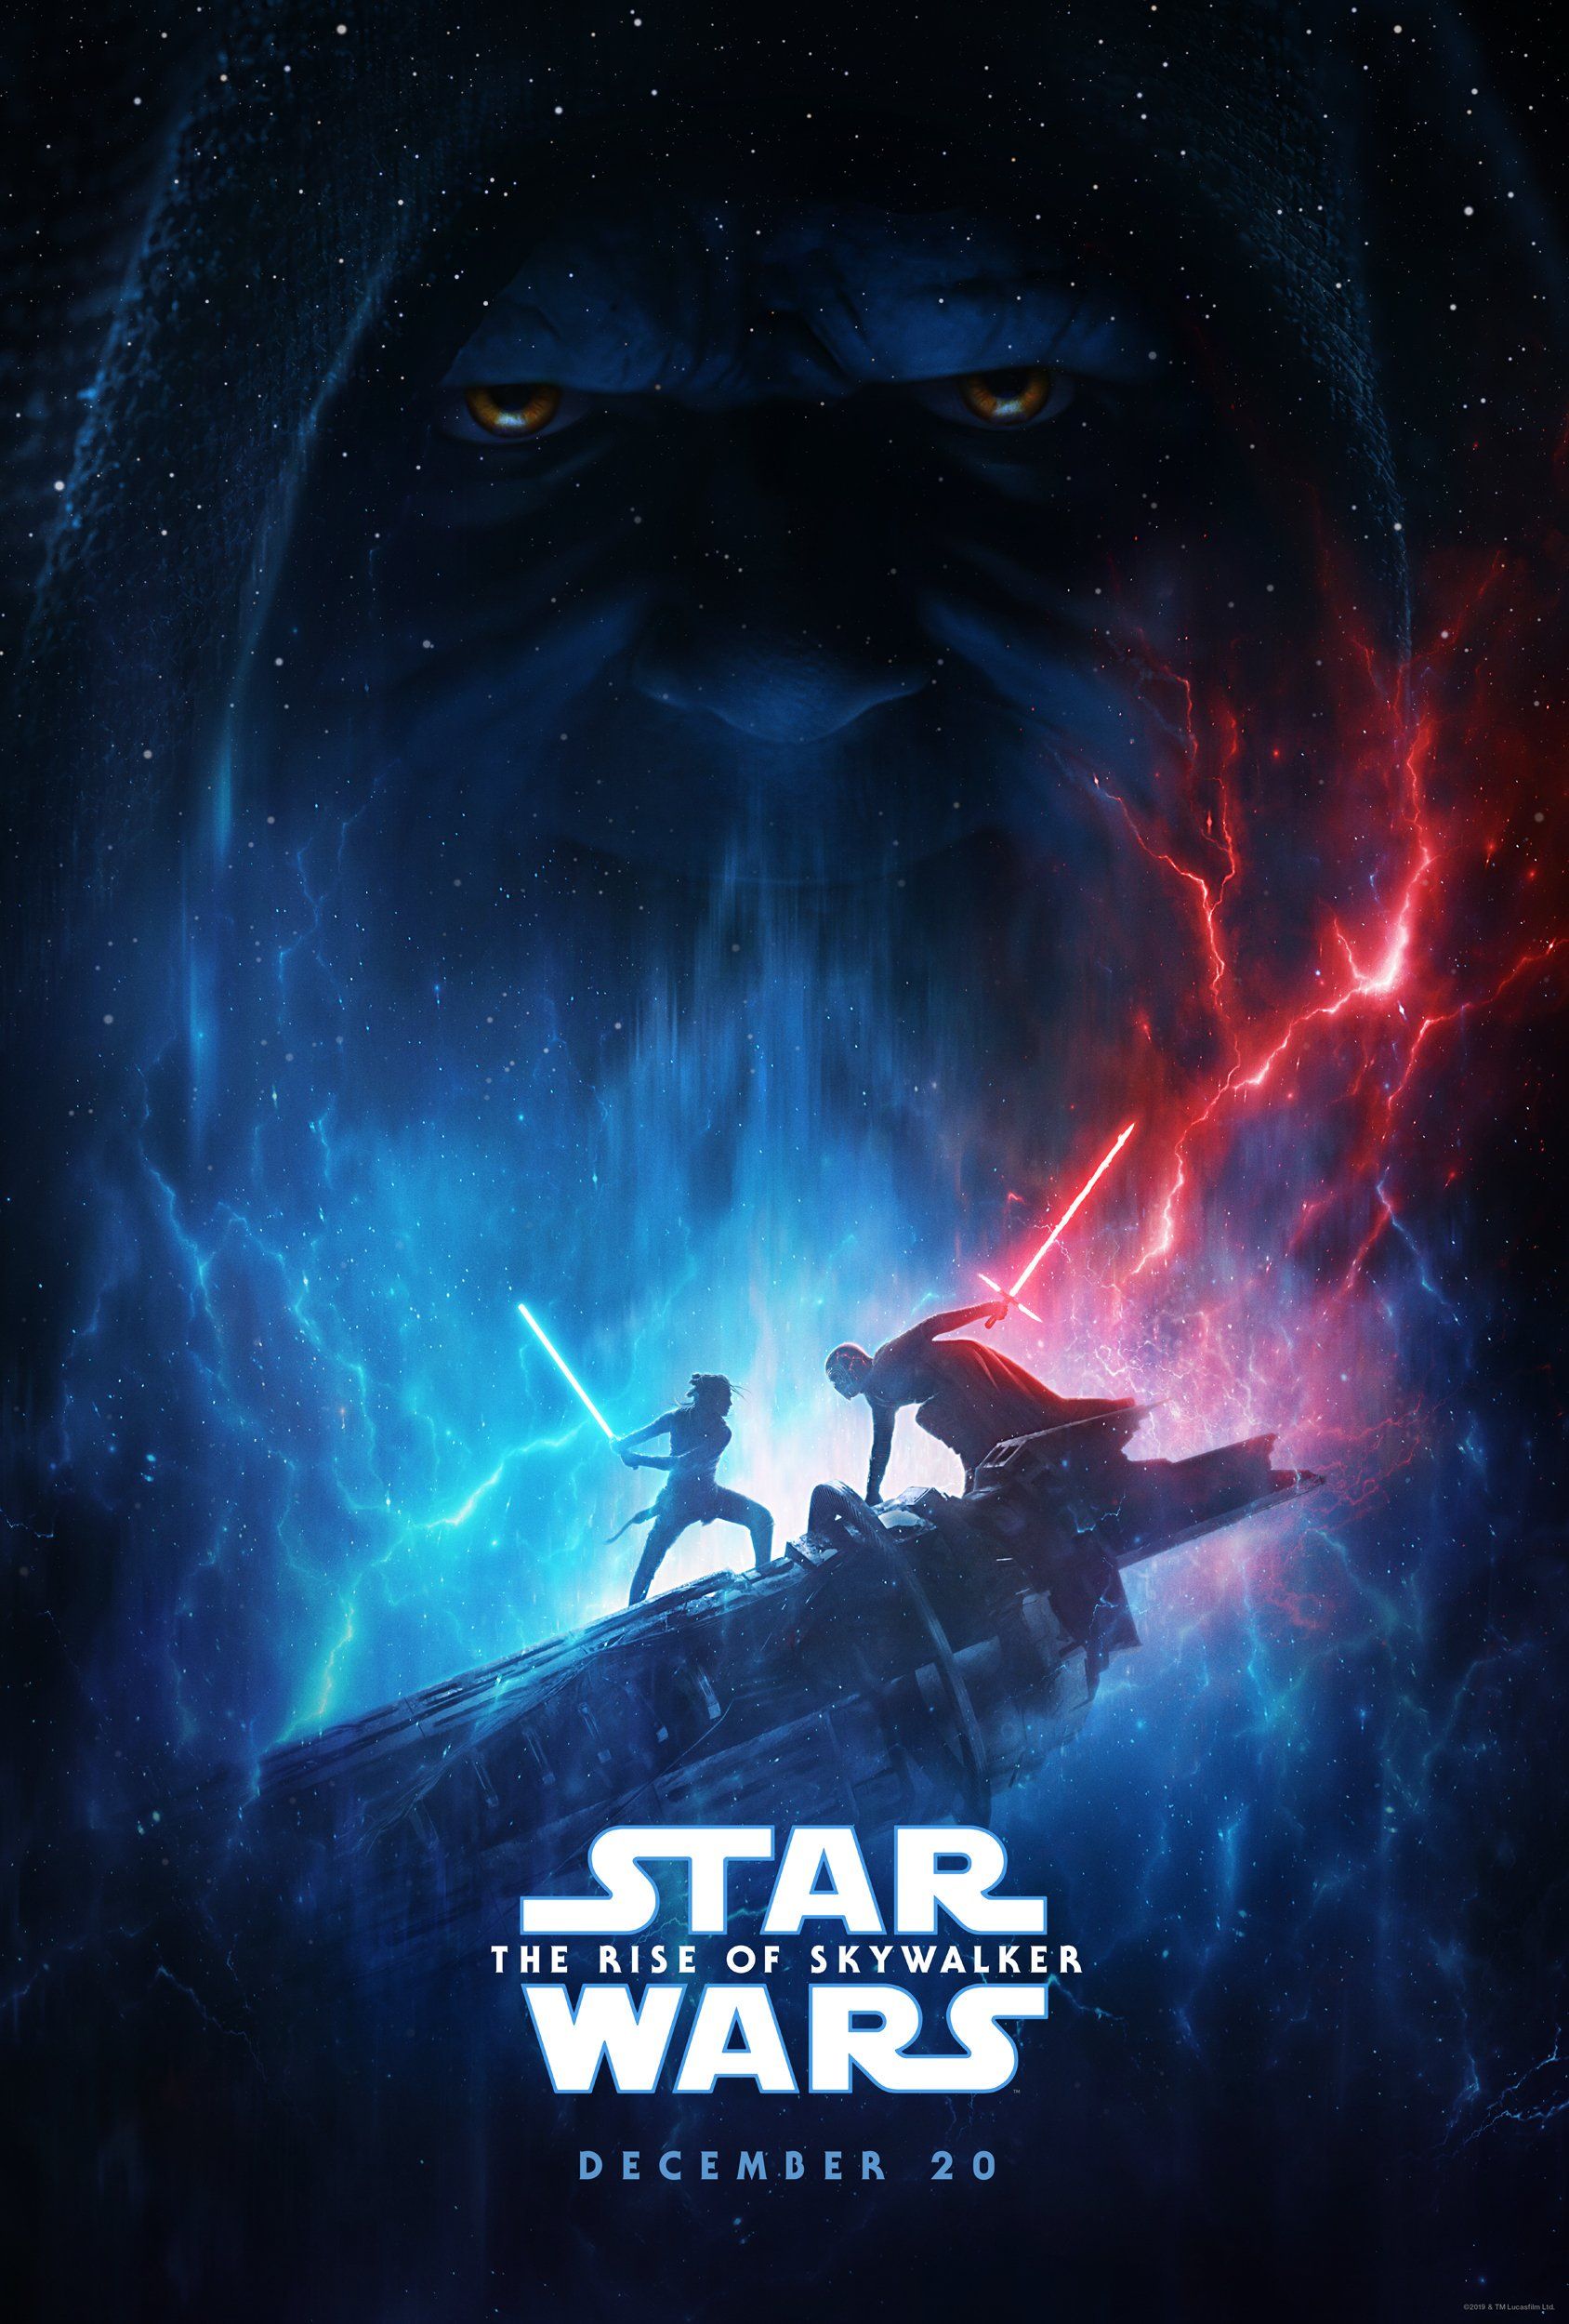 New Poster for Star Wars: The Rise of Skywalker Revealed! Plus